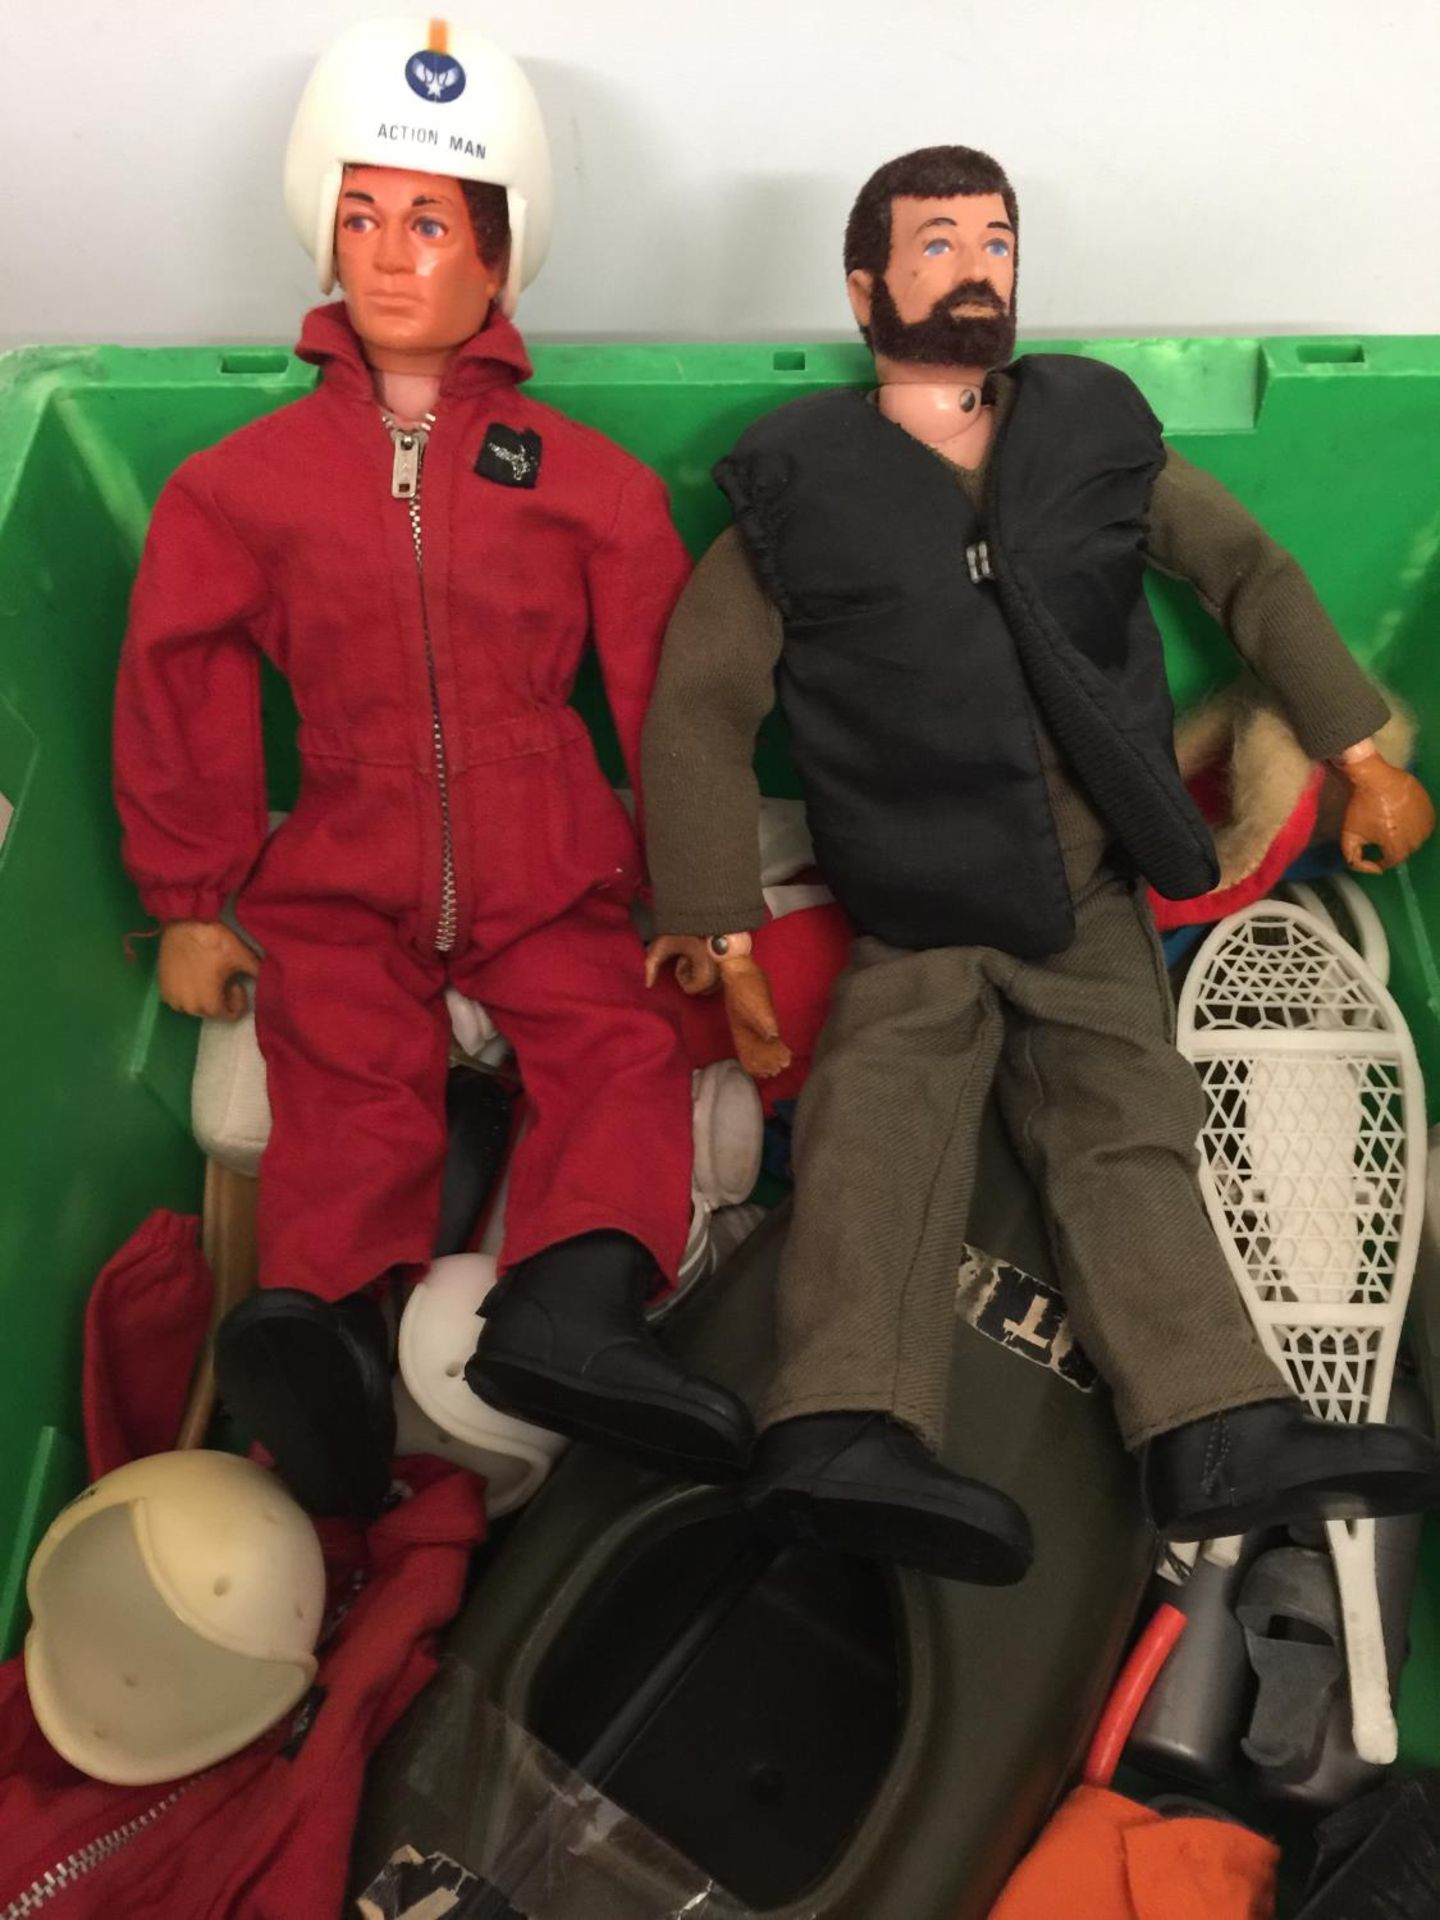 A COLLECTION OF VINTAGE ACTION MAN ITEMS TO INCLUDE TWO FIGURES ( 1 WITH EAGLE EYES), A CANOE, - Image 2 of 5